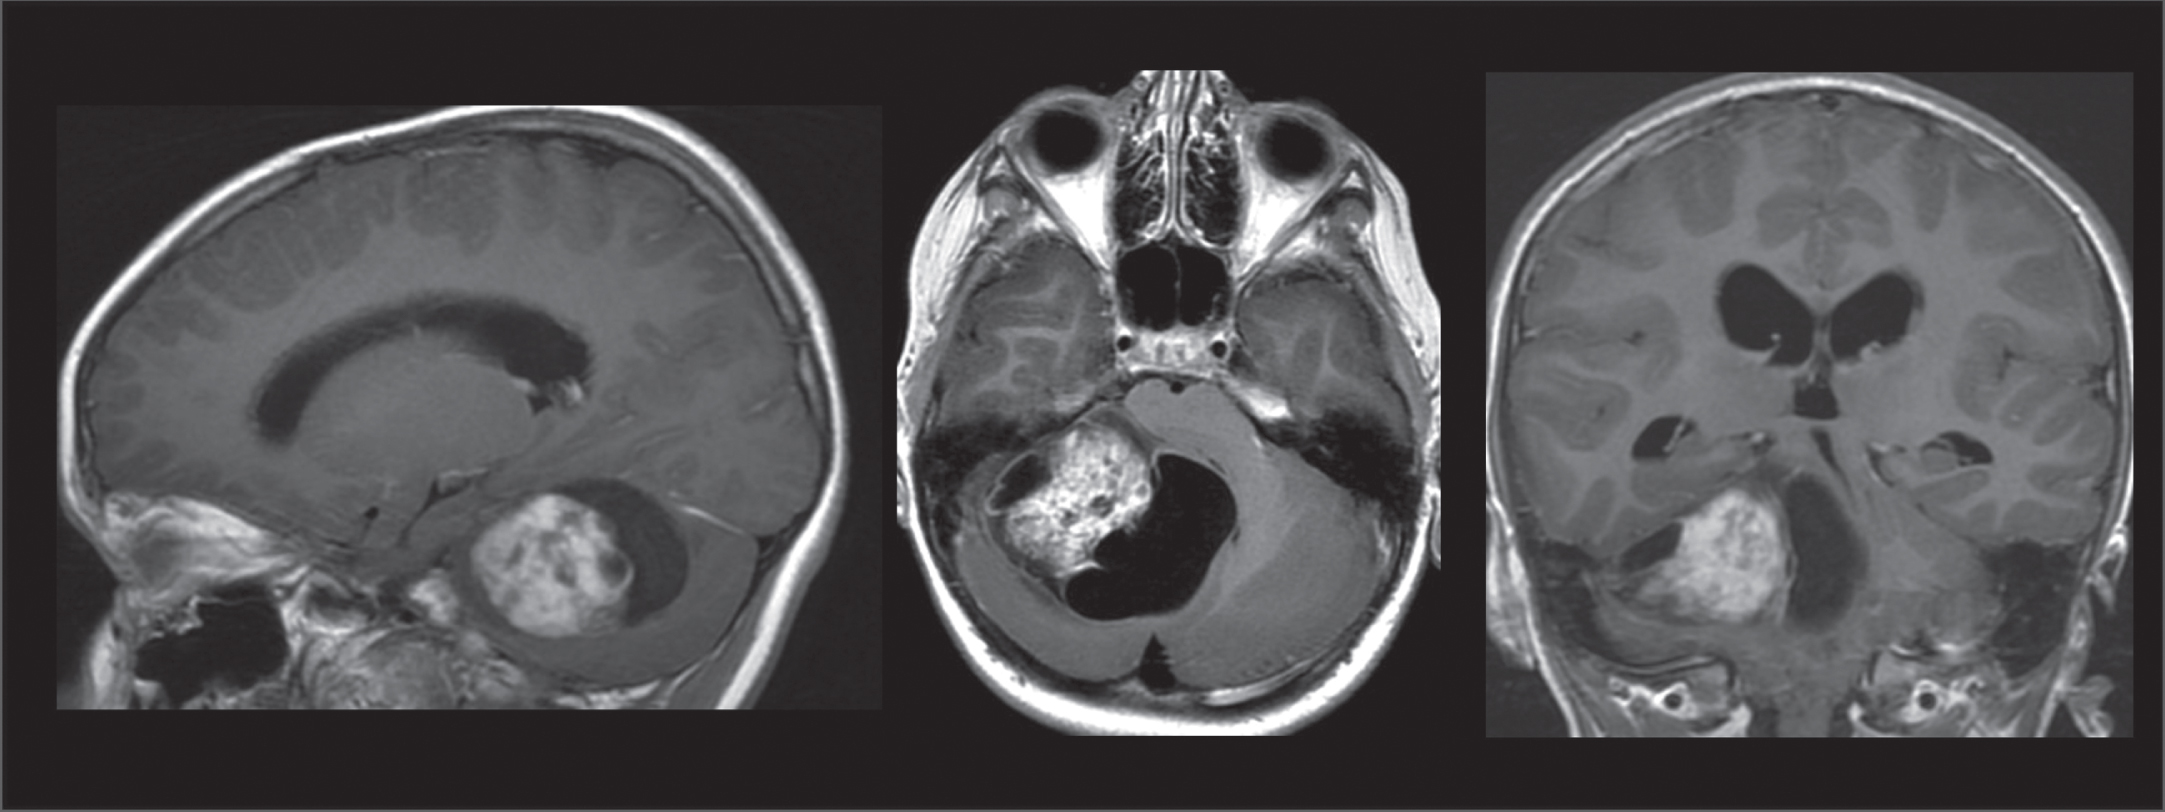 MRI findings of a tumor in the right cerebellar hemisphere. T1 weighted sequences in a sagittal, axial, and frontal view.